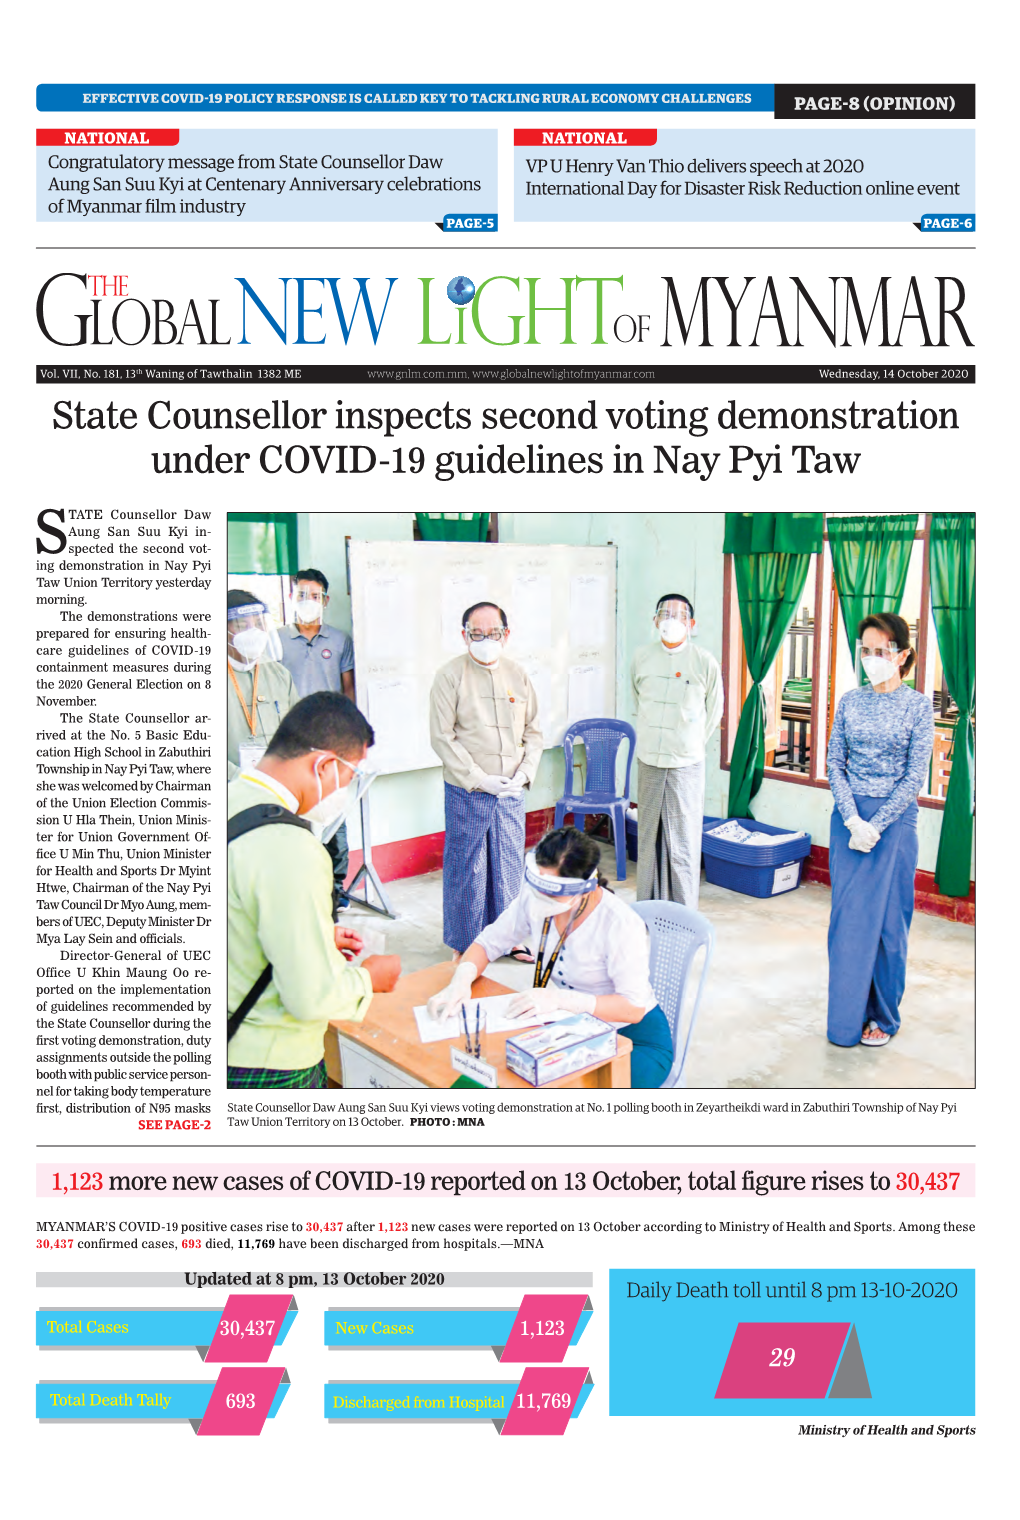 State Counsellor Inspects Second Voting Demonstration Under COVID-19 Guidelines in Nay Pyi Taw